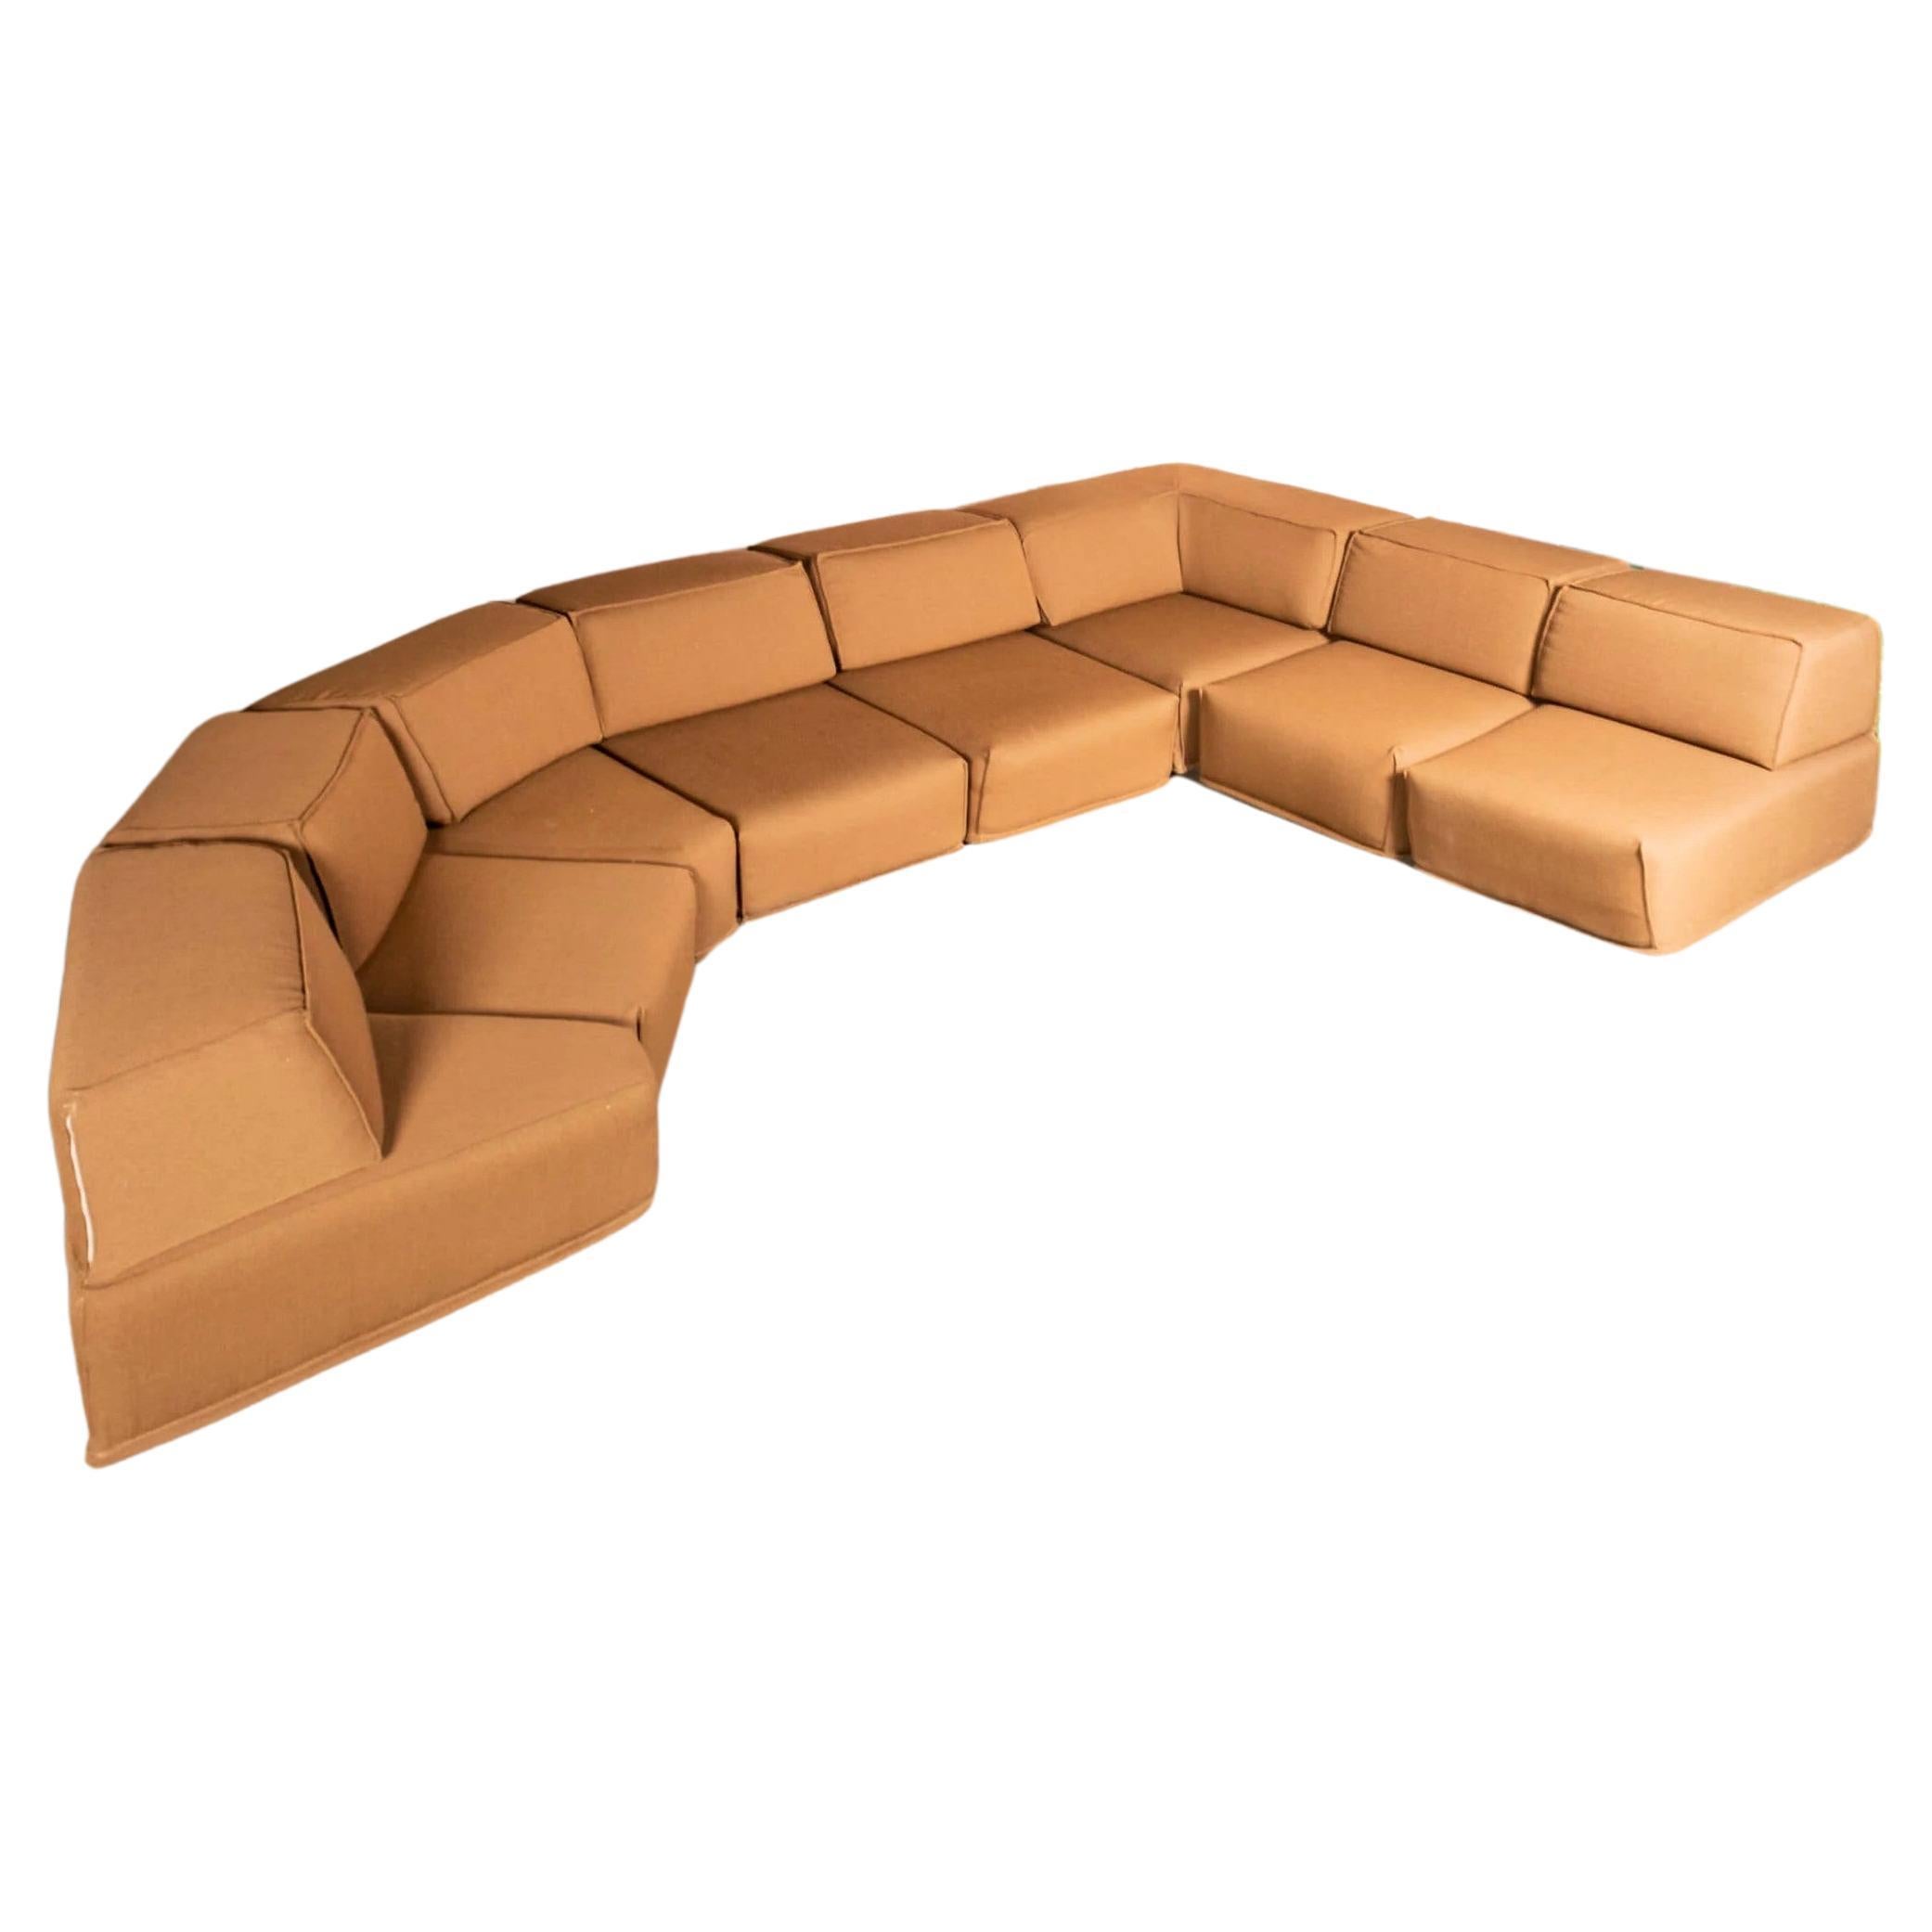 1970 COR 'Trio' 8 Pieces Modular Sofa by Team Form AG, Newly Reupholstered